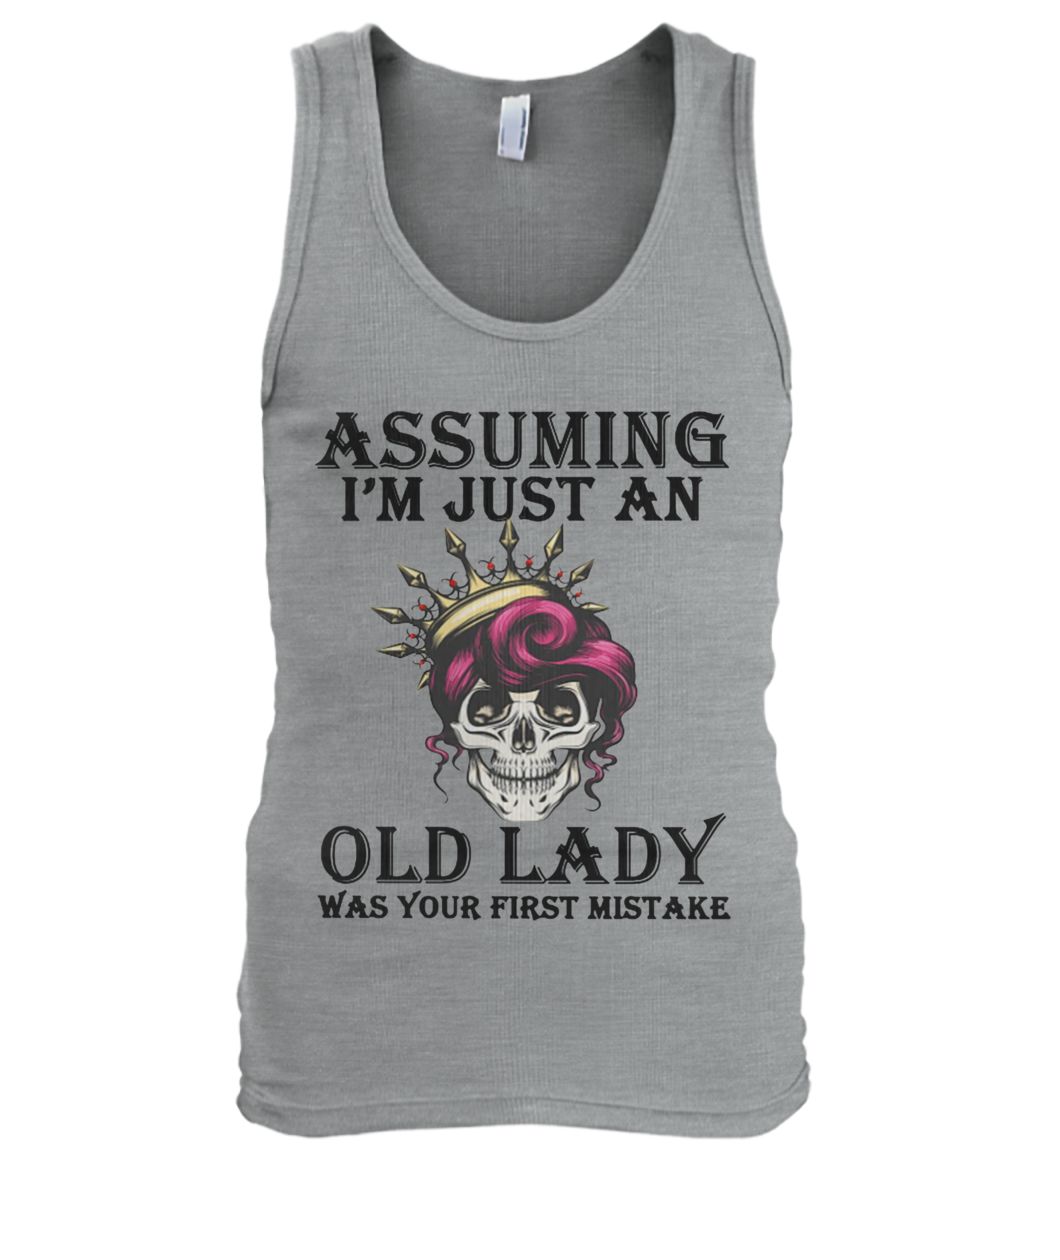 Skull queen assuming I'm just an old lady was your first mistake men's tank top